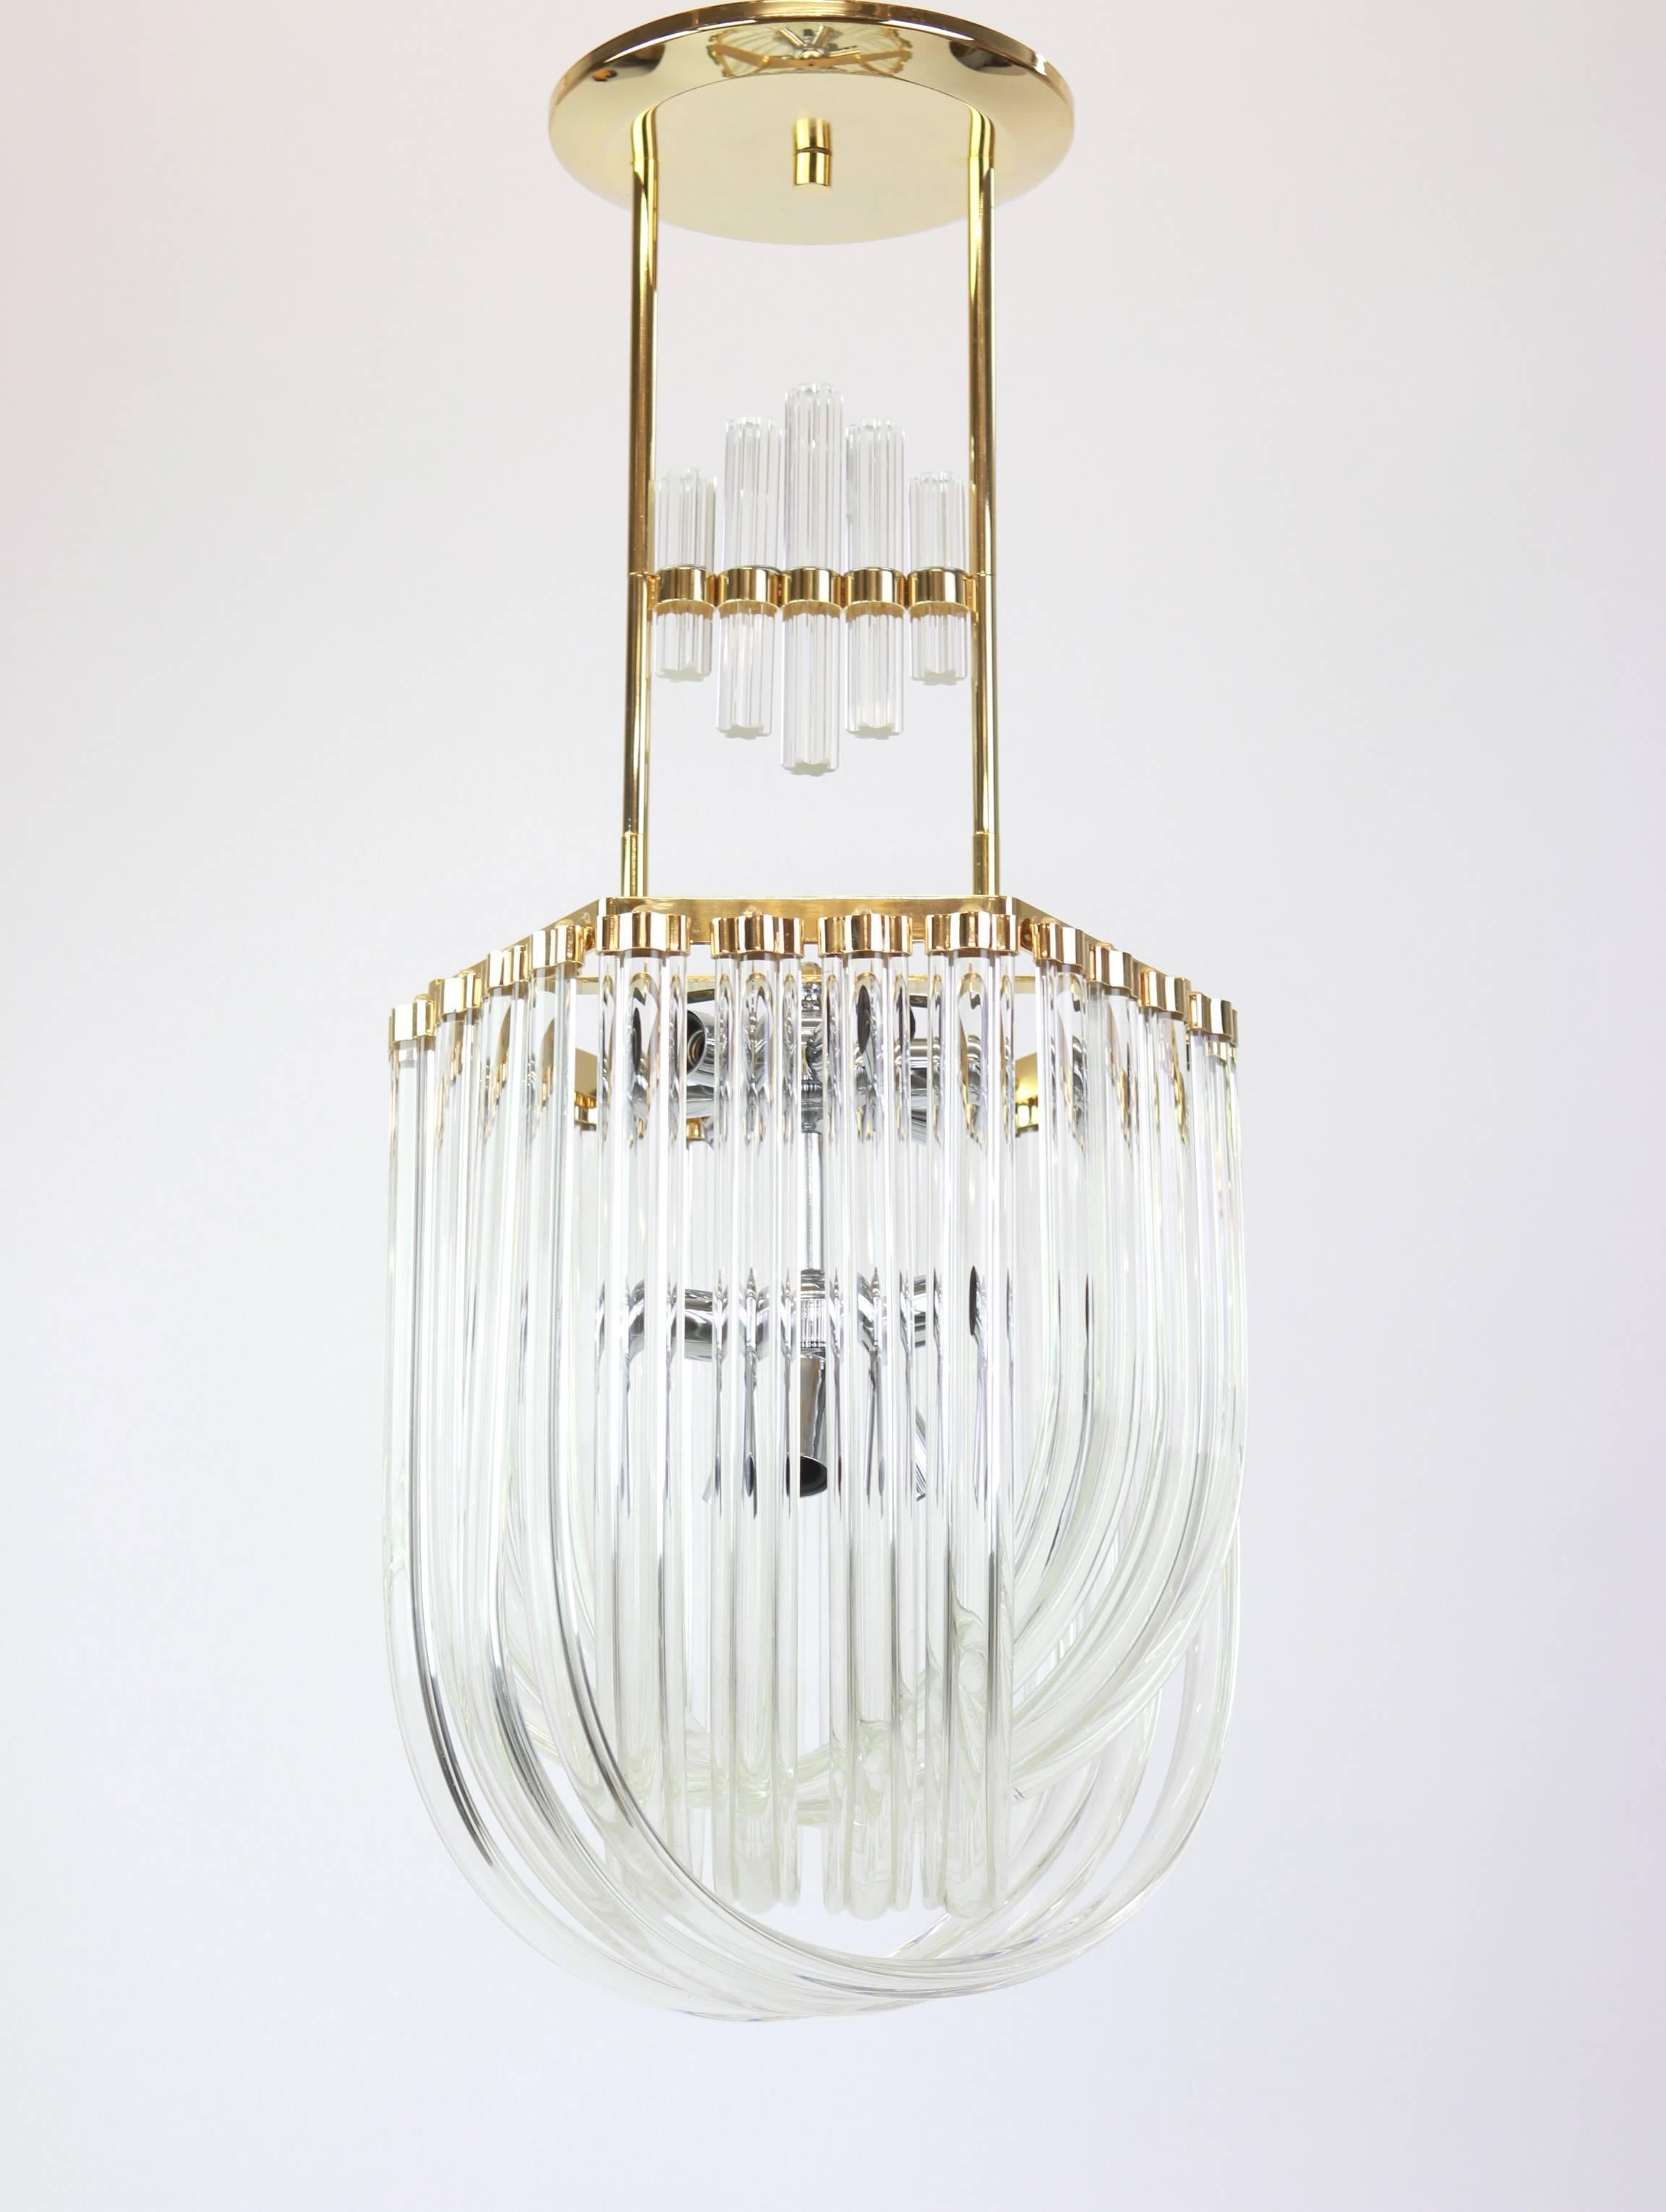 Curved glass pendant light in Venini style in a brass frame in a basket-shape.
Sockets: It needs 12 x E14 candelabra bulbs. (40 watt each) and function on voltage from 110 till 240 volts (for USA - UK - etc ...)
Very good original condition. Small